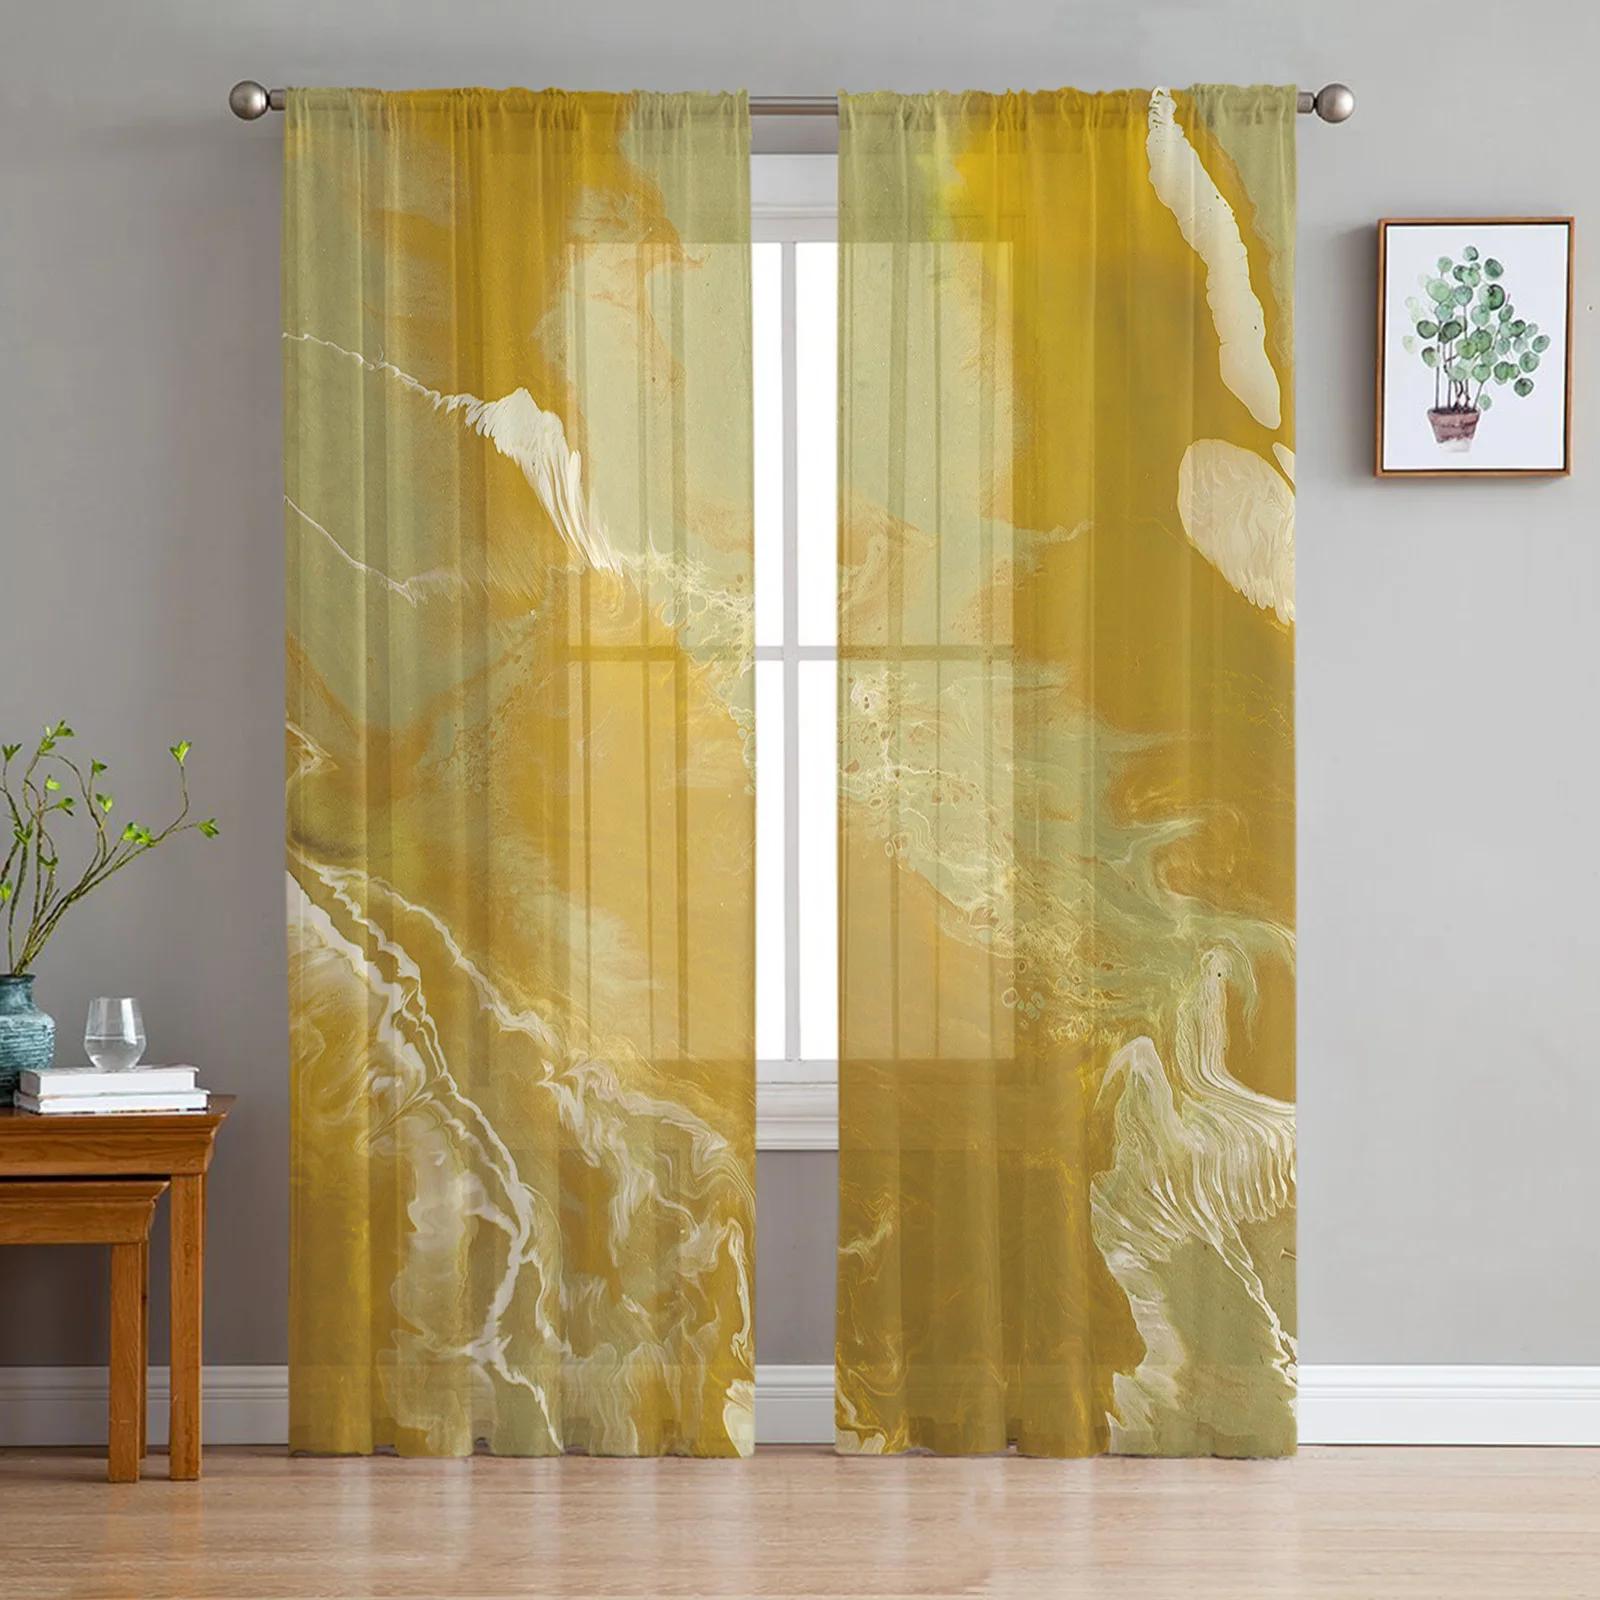 Abstract Yellow Marble Sheer Curtains for Living Room Bedroom Home Decor Kitchen Tulle for Windows Voile Drapes